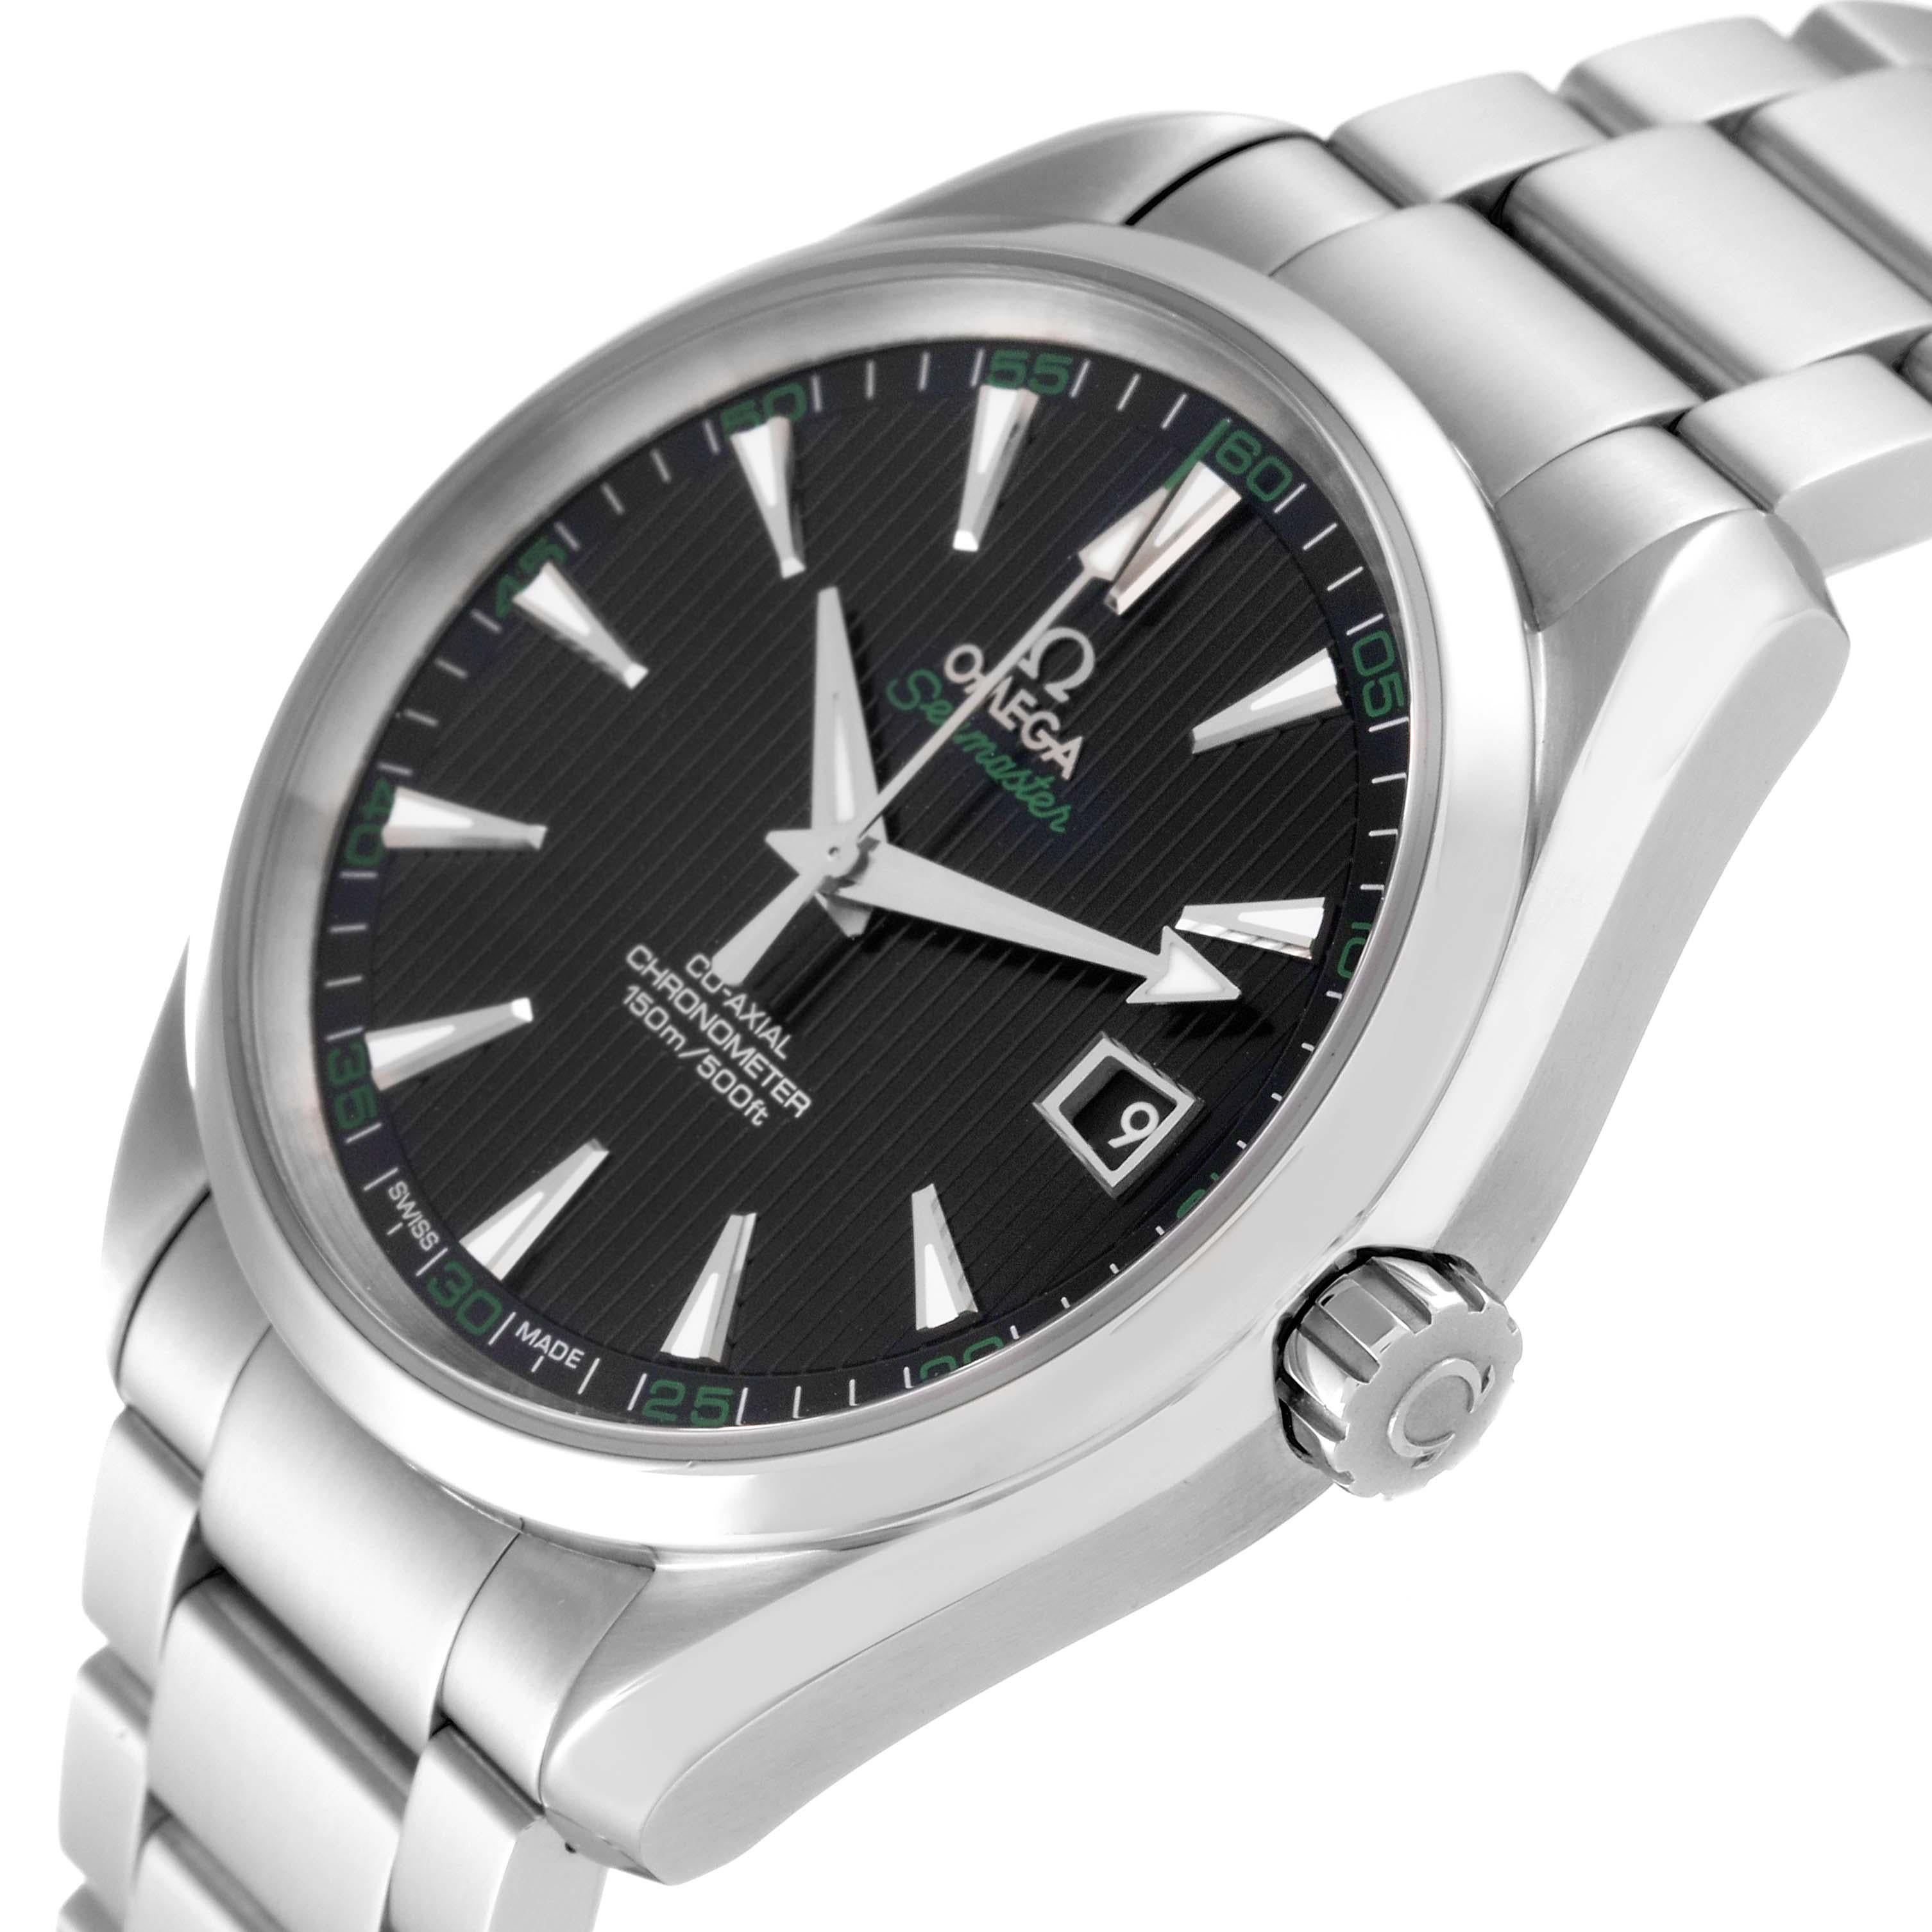 Omega Seamaster Aqua Terra Golf Edition Steel Mens Watch 231.10.42.21.01.001 Card. Automatic self-winding movement. Stainless steel round case 41.5 mm in diameter. Transparent exhibition sapphire crystal caseback. Stainless steel smooth bezel.